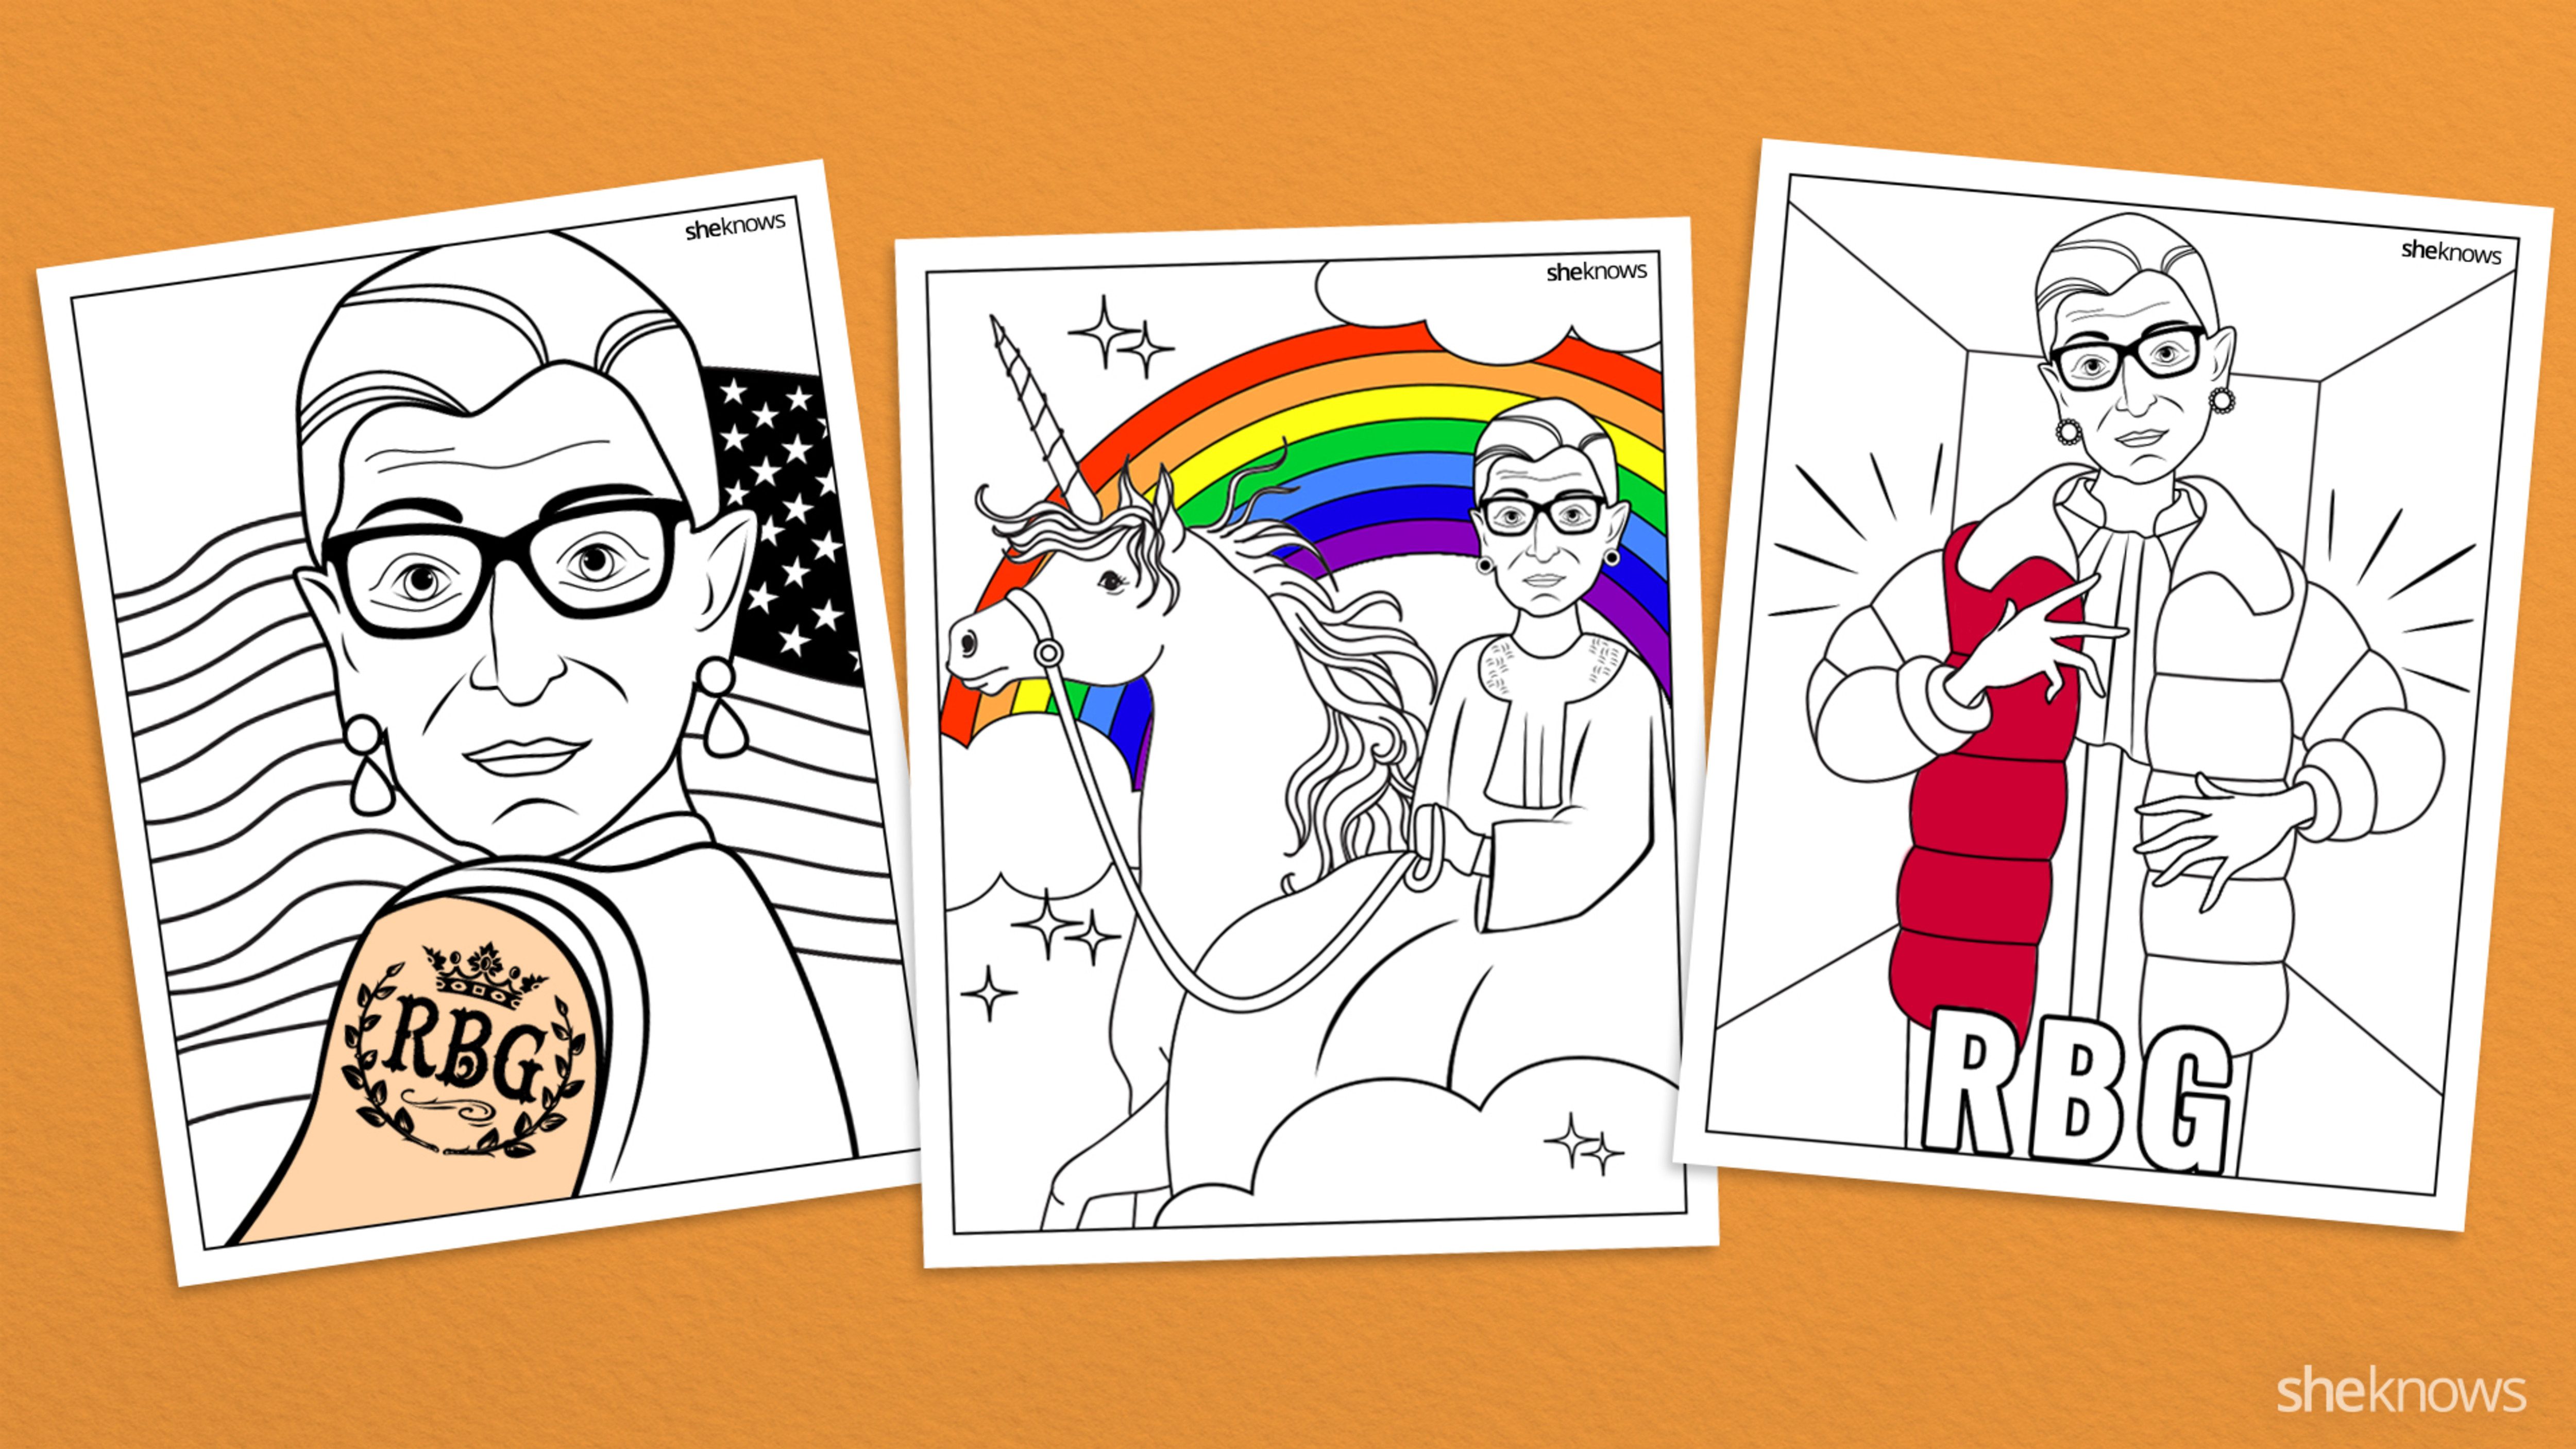 Ruth Bader Ginsburg free printable coloring pages. Awesome!